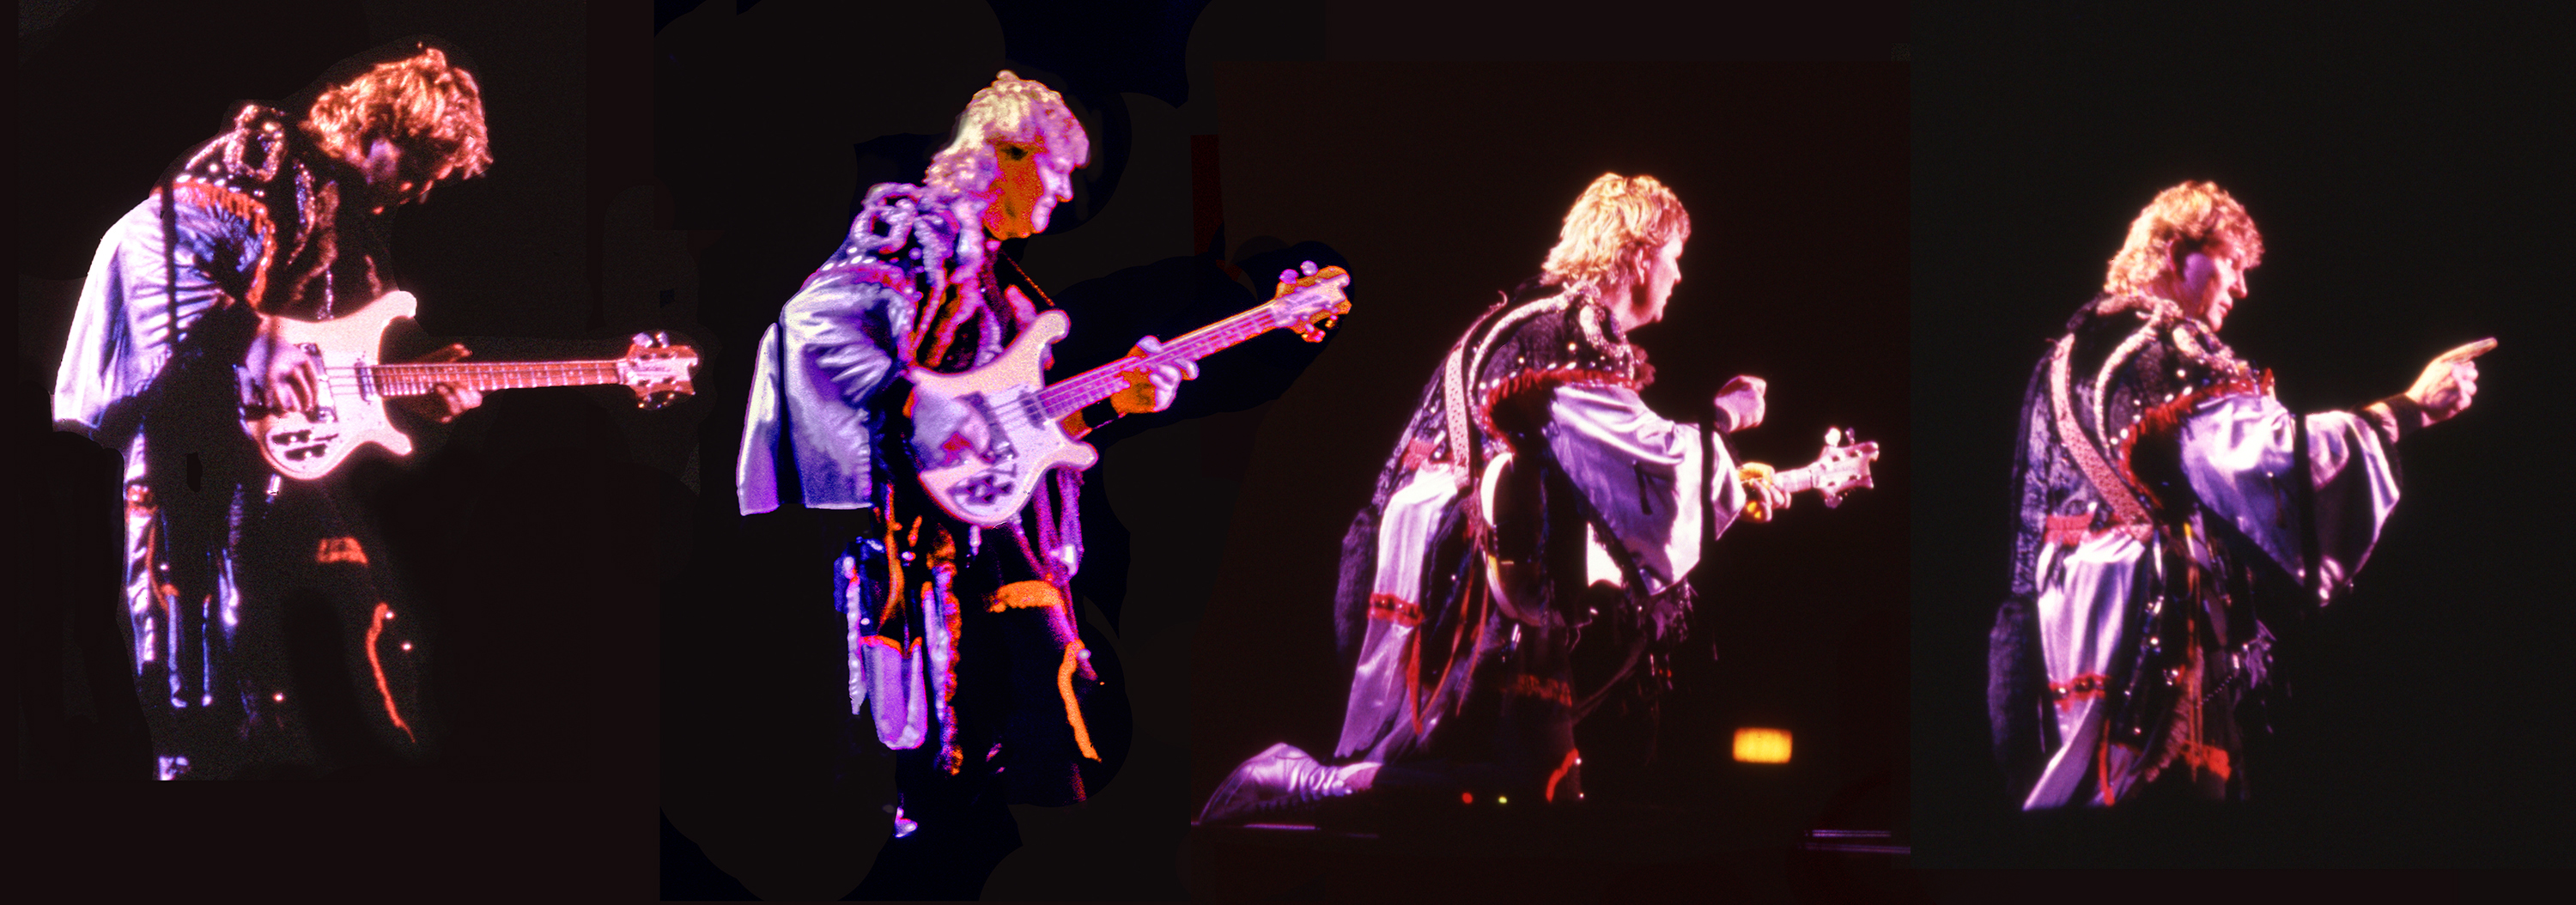 Chris Squire | “Whitefish” Solo | Miami University, Oxford OH | Photo Montage: Sam A. Marshall/Cincinnati OH